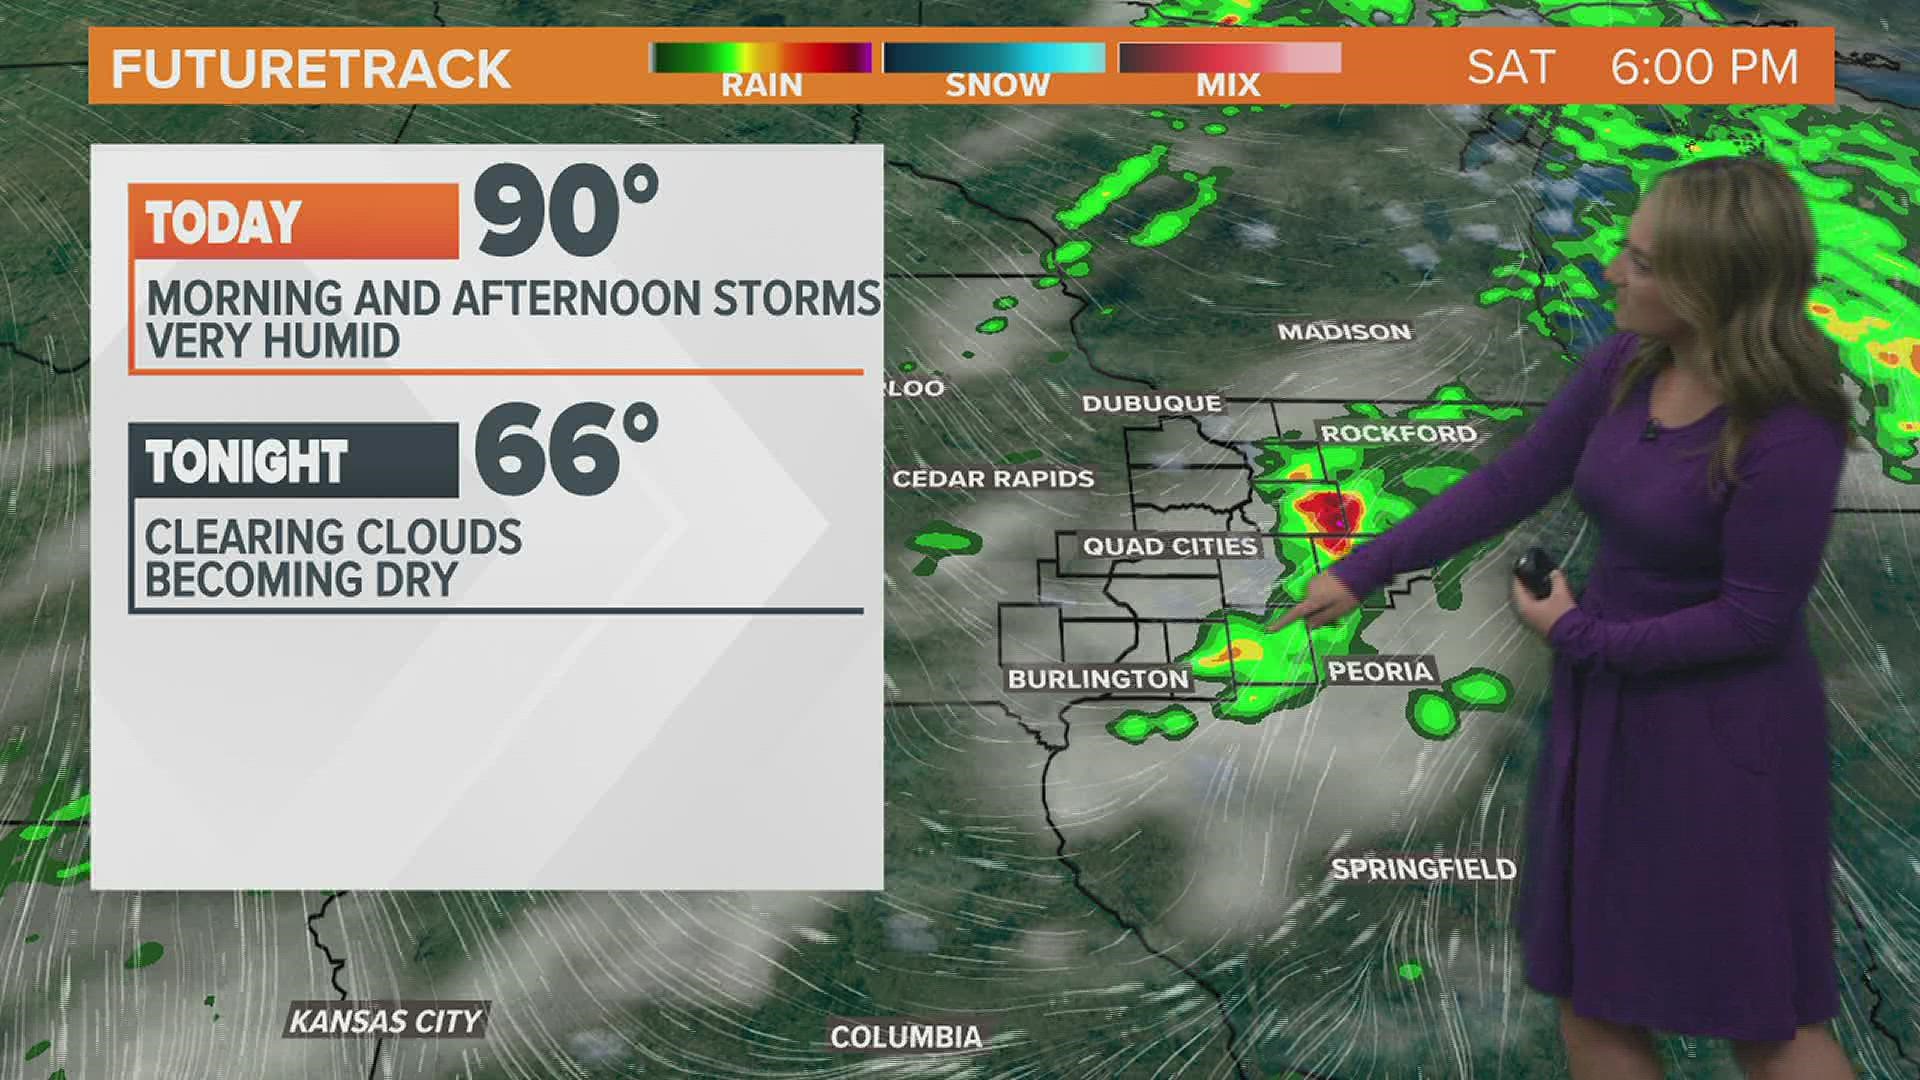 Another round of showers and storms expected this afternoon